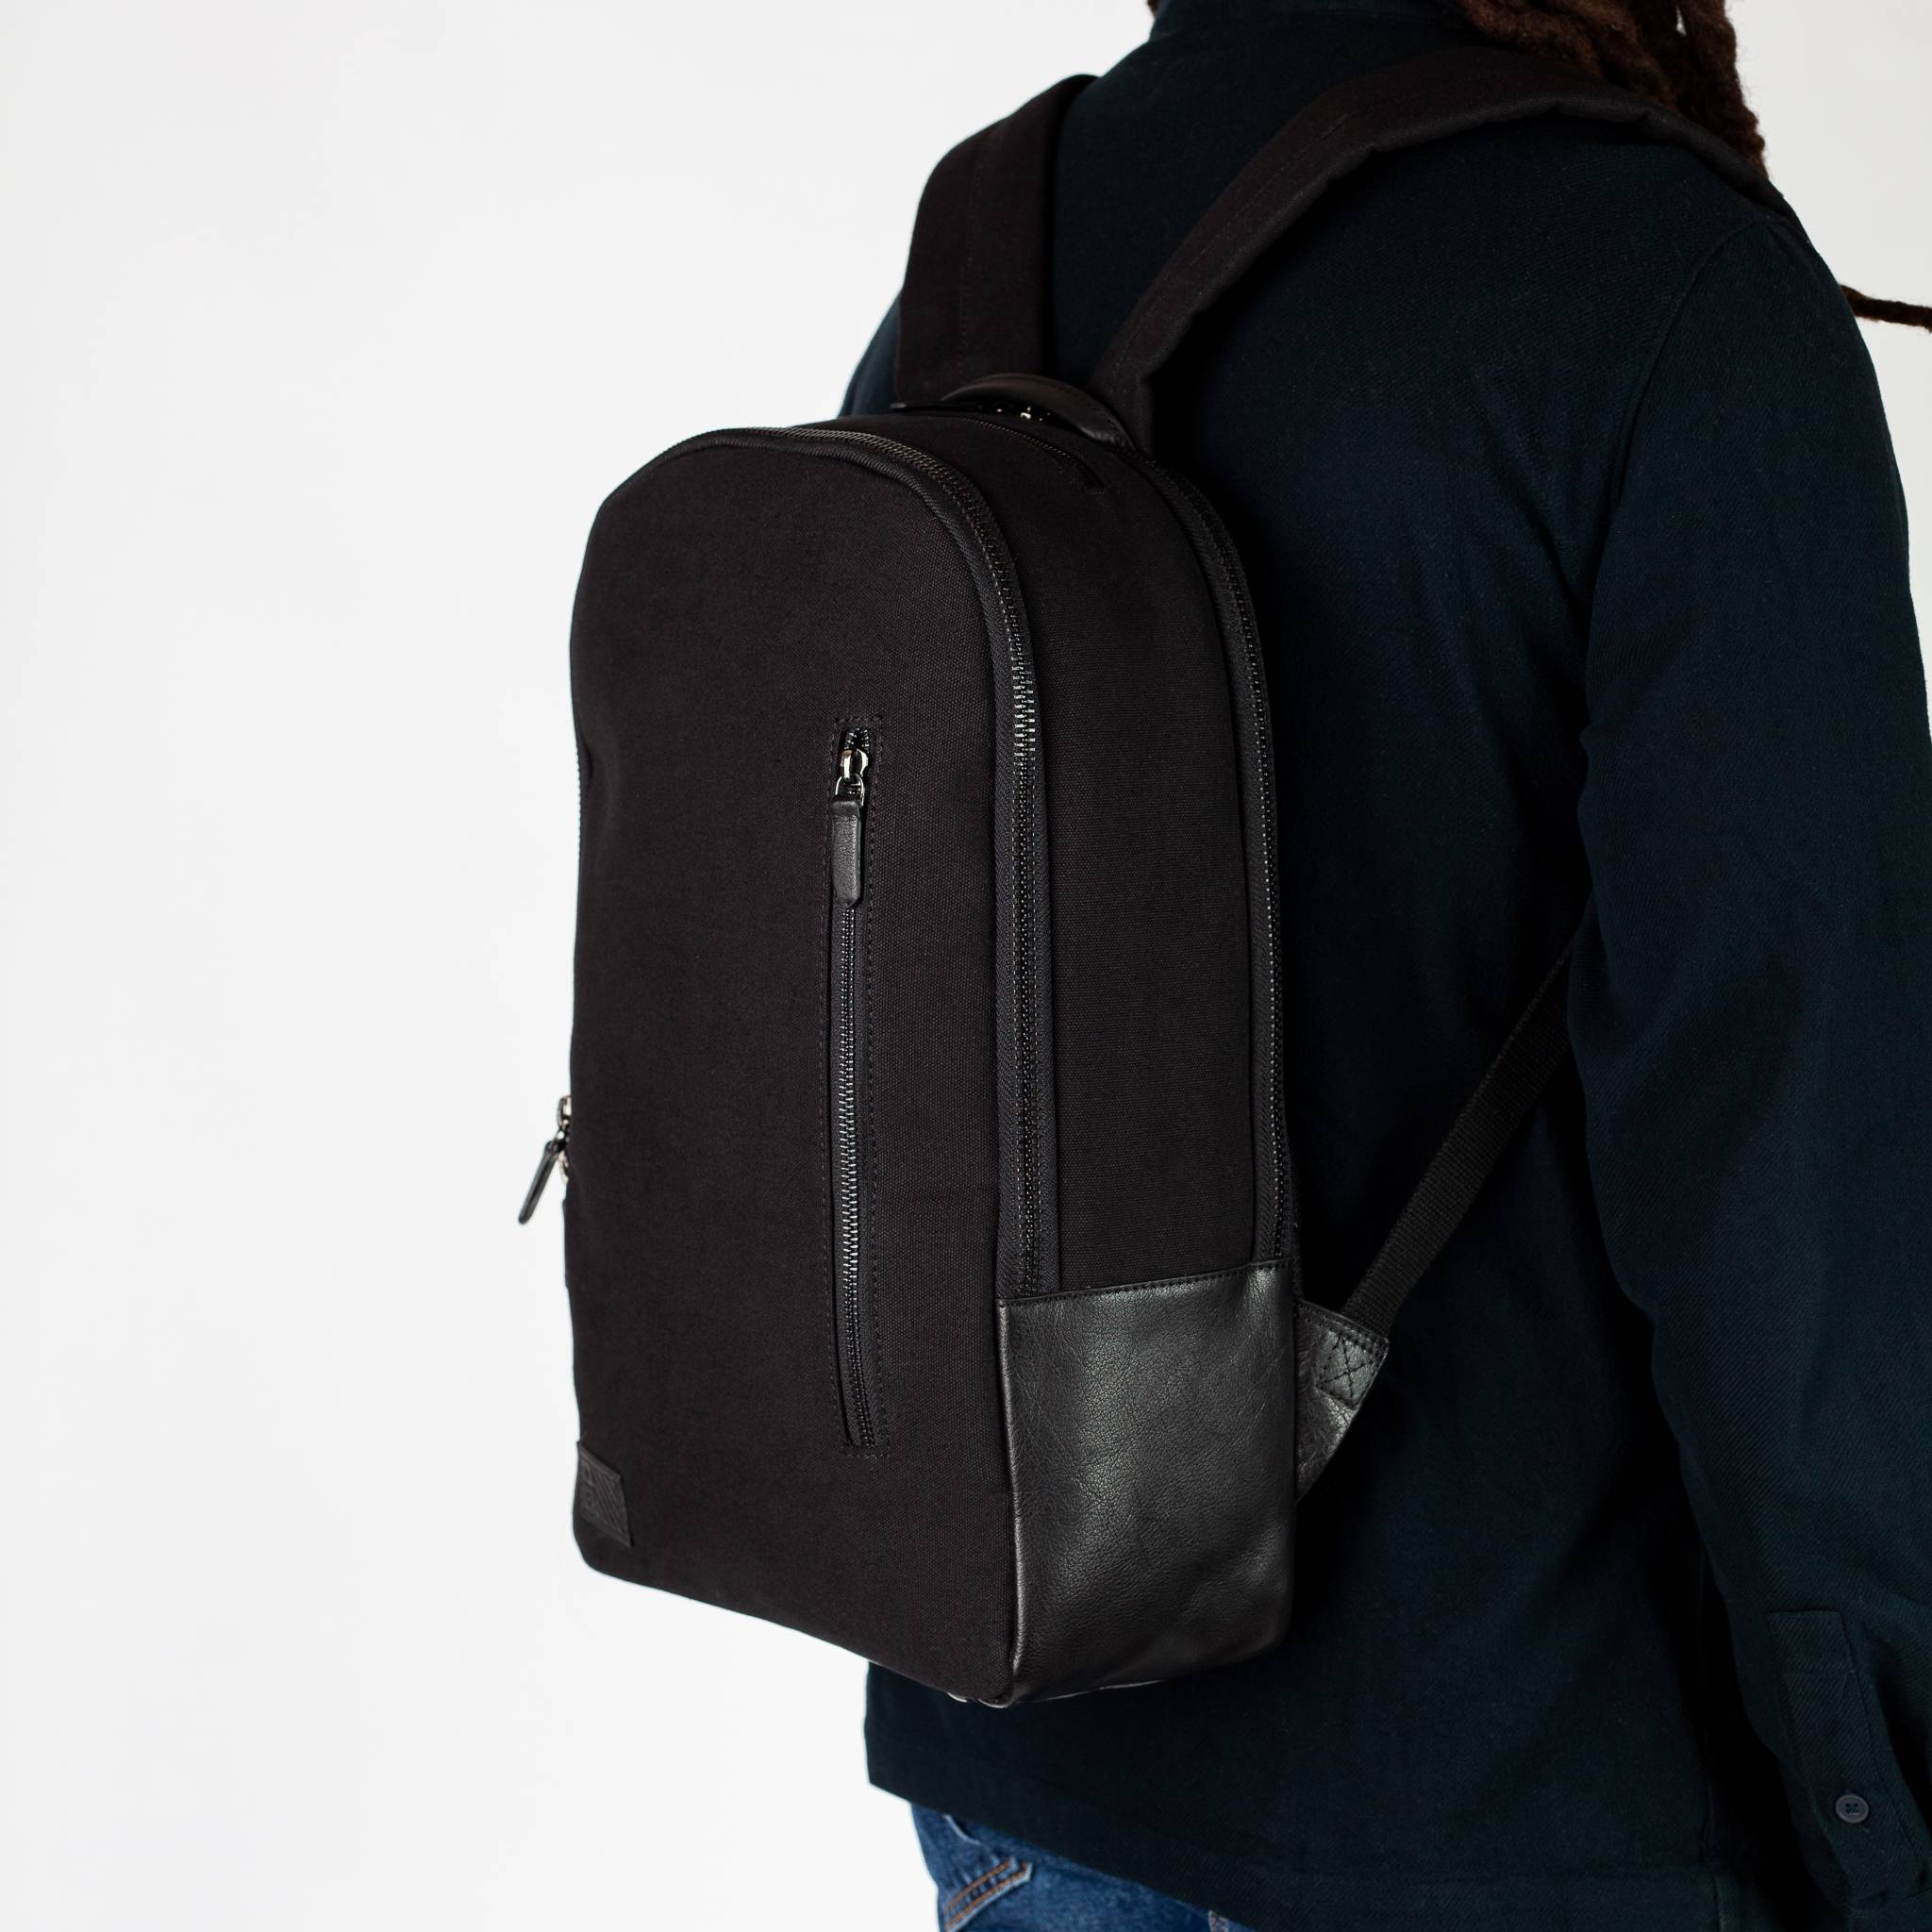 The duty backpack choice of thousands: The Silent Partner™